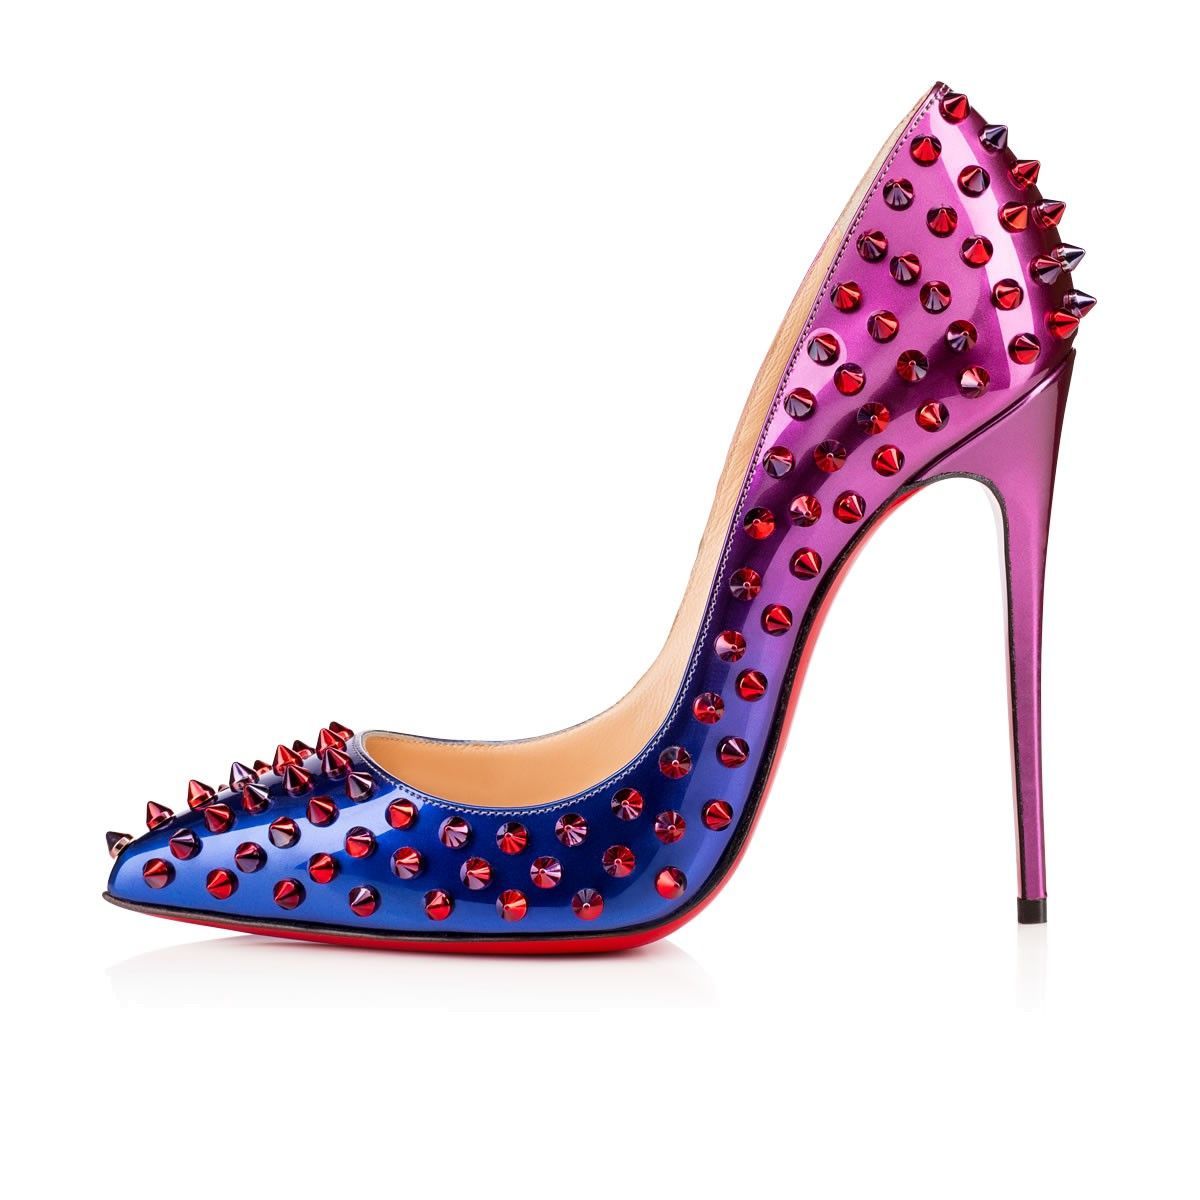 #Christian #Louboutin #Outlet This A Everlasting Pursuit